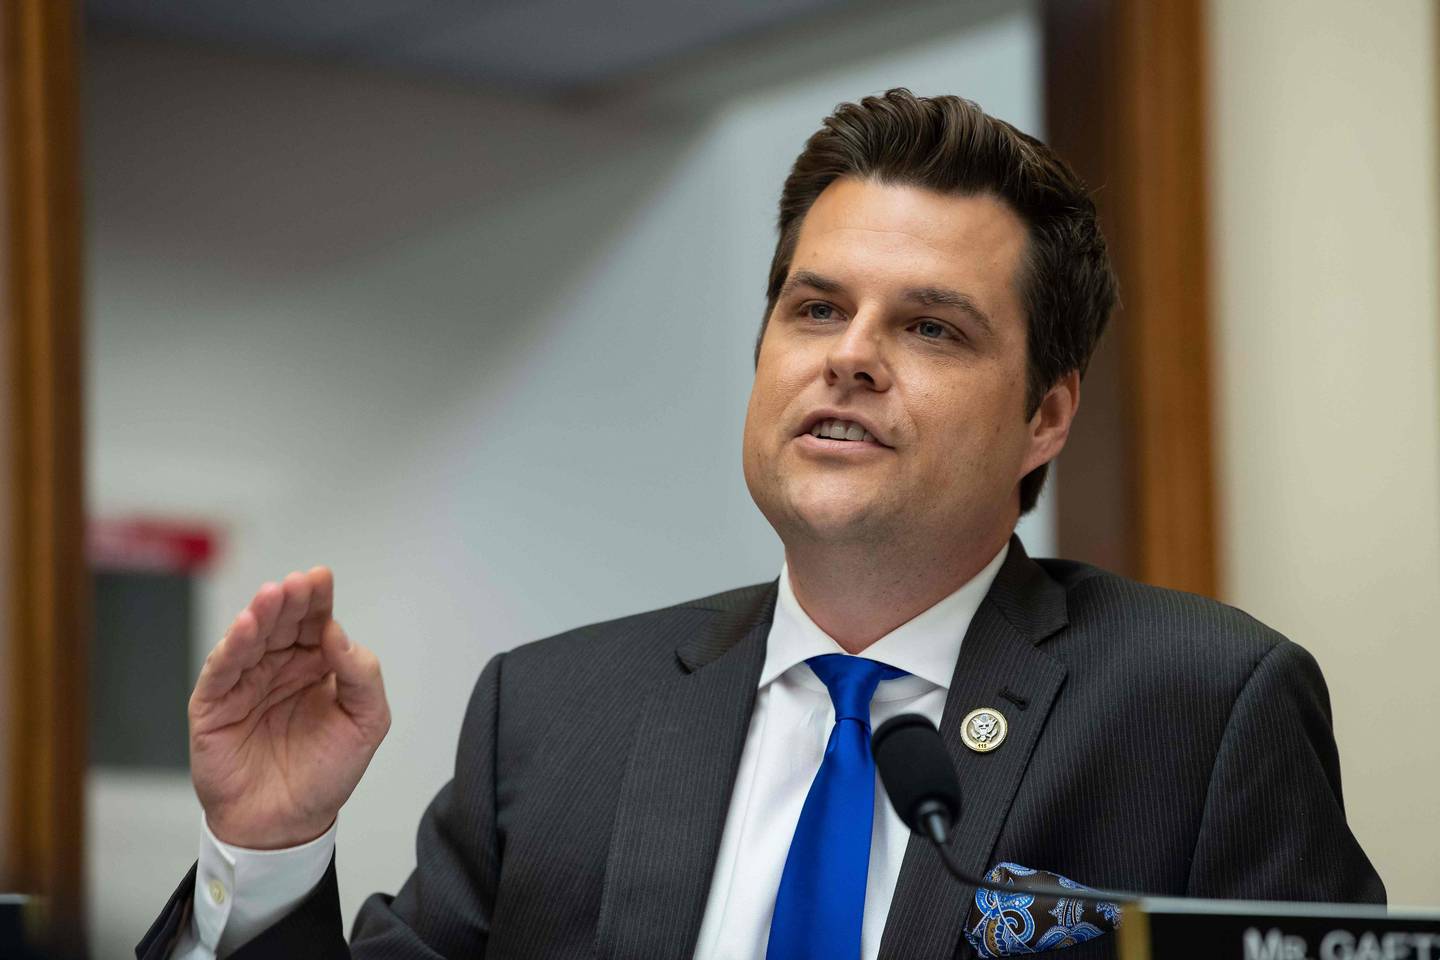 (FILES) In this file photo taken on May 8, 2019 US Republican Representative from Florida Matt Gaetz speaks during a markup of a resolution supporting the committee report on Attorney General William Barr's failure to produce the unredacted Mueller report and underlying materials on Capitol Hill in Washington, DC. - Furious about being left out of the Donald Trump impeachment process, US congressional Republicans stormed a closed-door witness deposition on October 23, 2019 and refused to leave for several hours in an escalation of the showdown. "BREAKING: I led over 30 of my colleagues into the SCIF where (House Intelligence Committee chairman) Adam Schiff is holding secret impeachment depositions. Still inside - more details to come," tweeted congressman Matt Gaetz, a fierce Trump defender. (Photo by NICHOLAS KAMM / AFP)